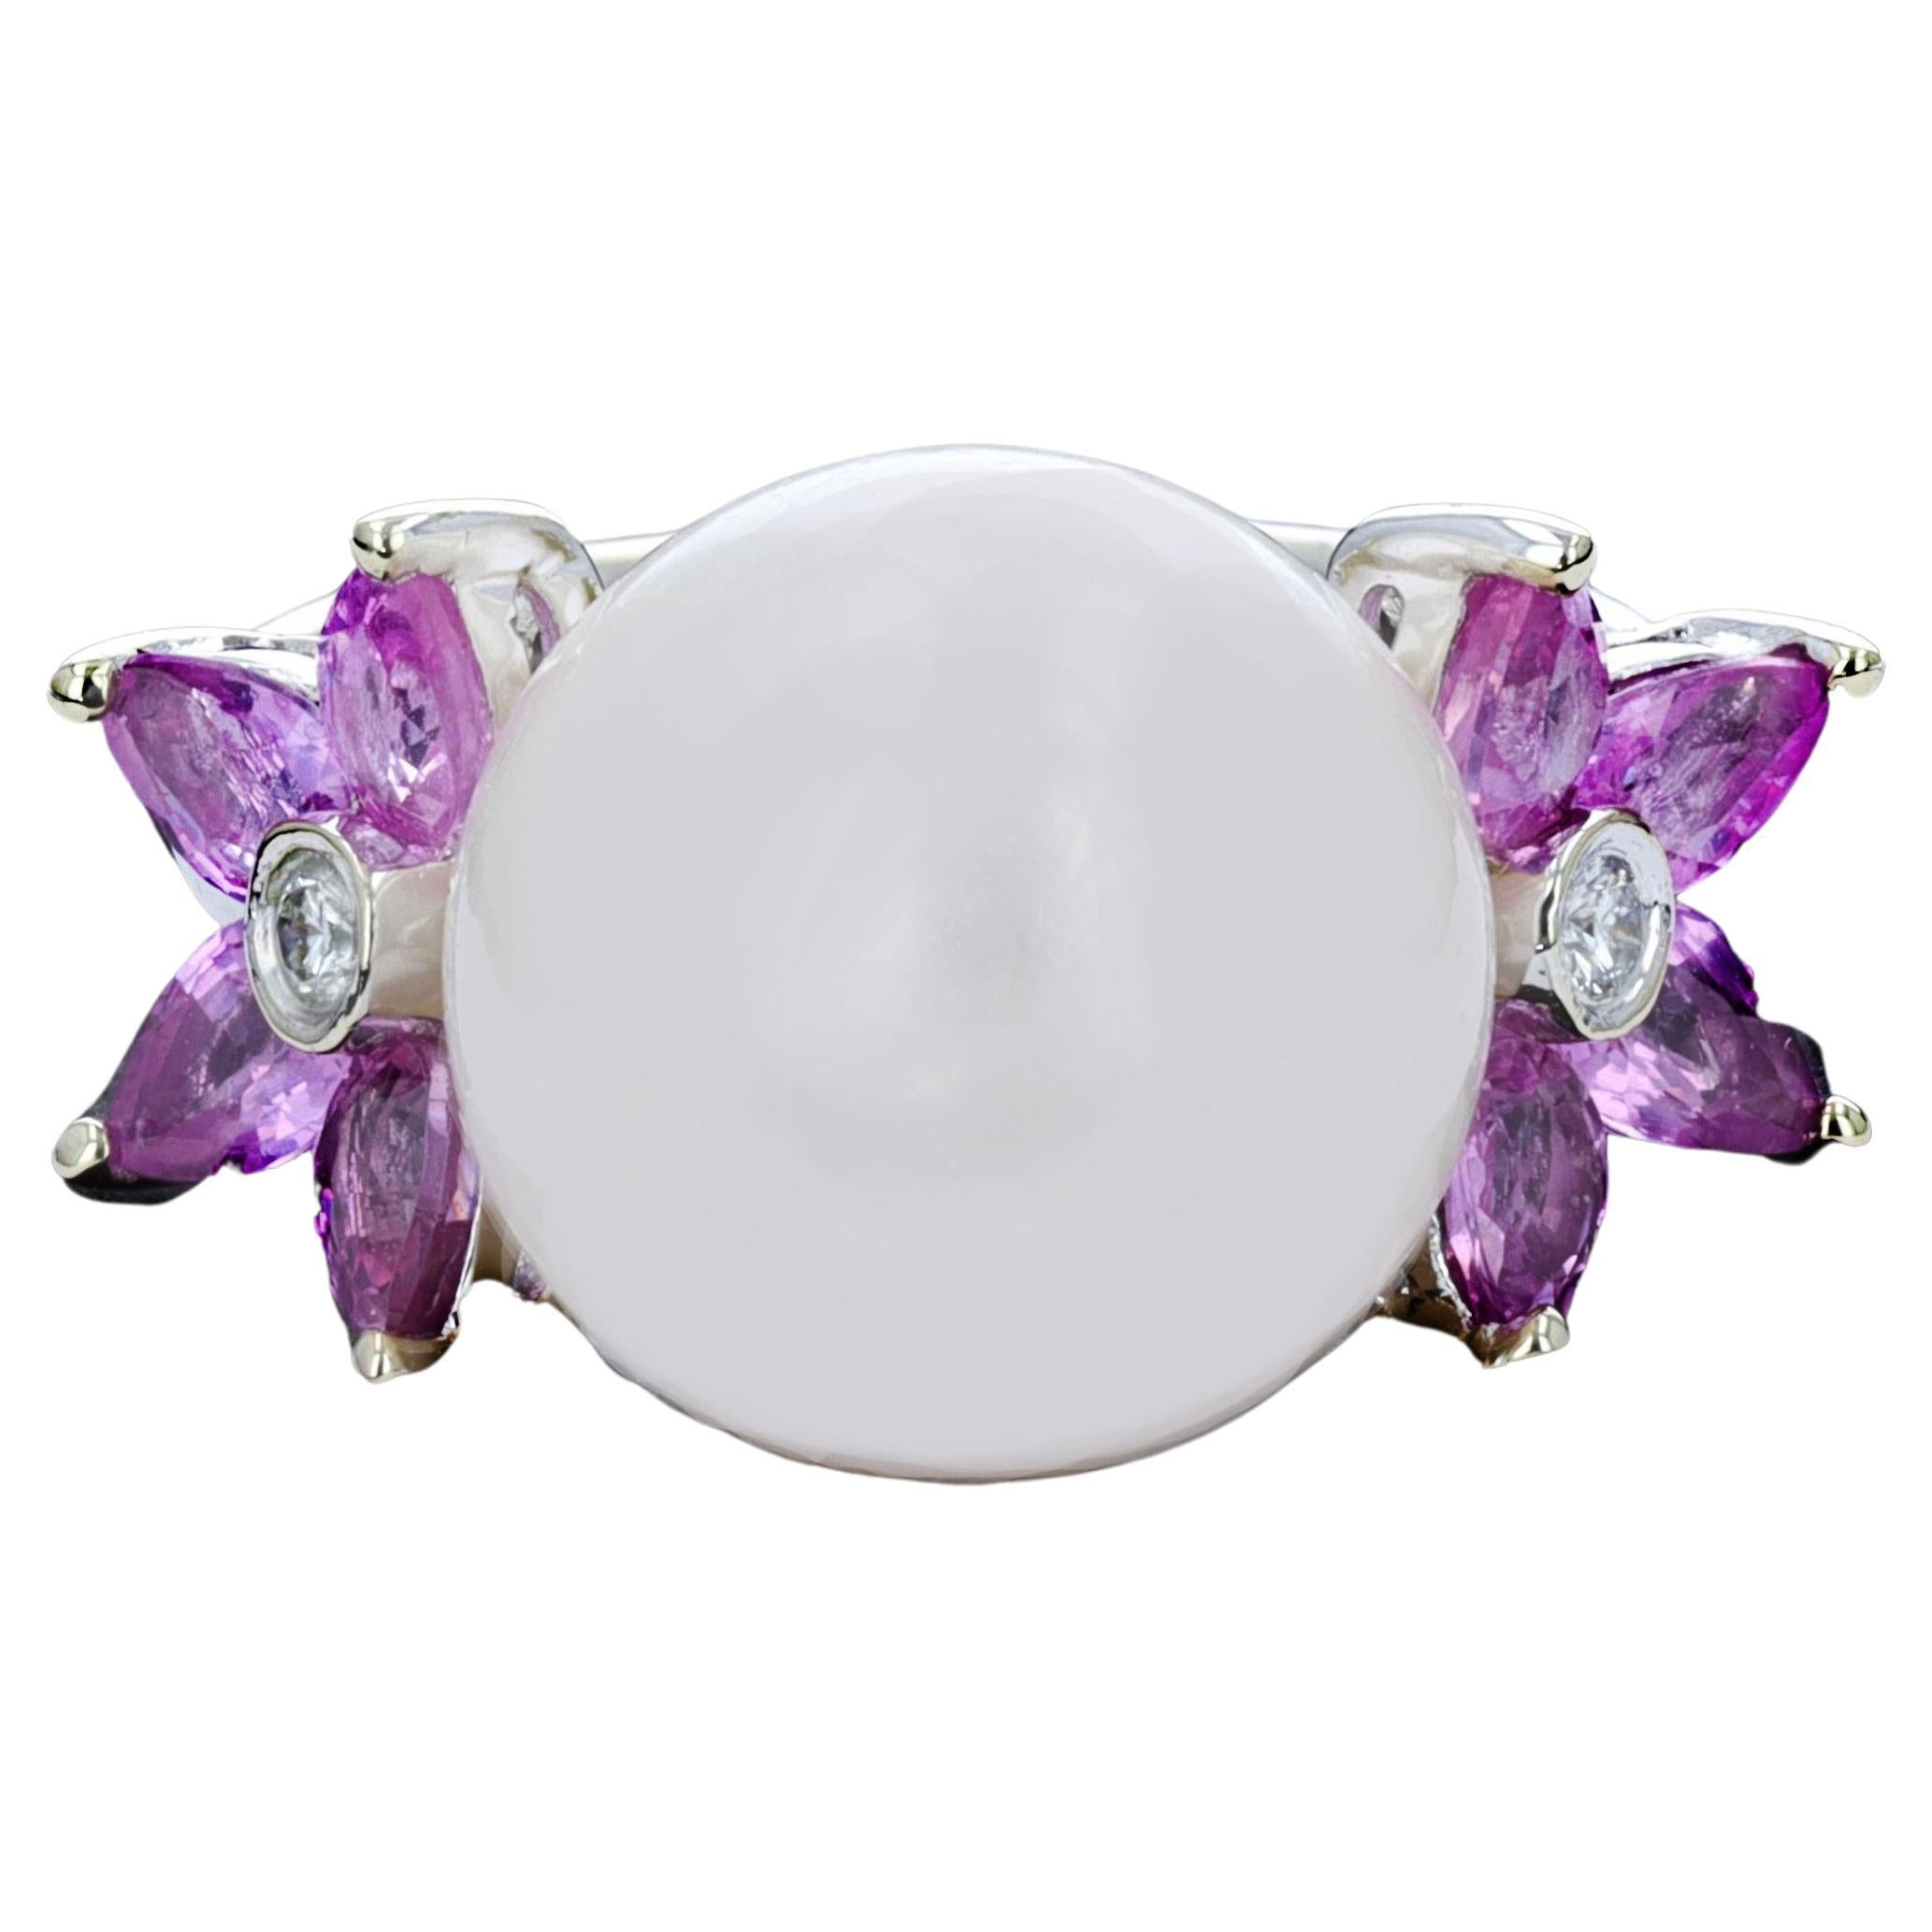 Bague en perles blanches avec saphirs roses taille marquise